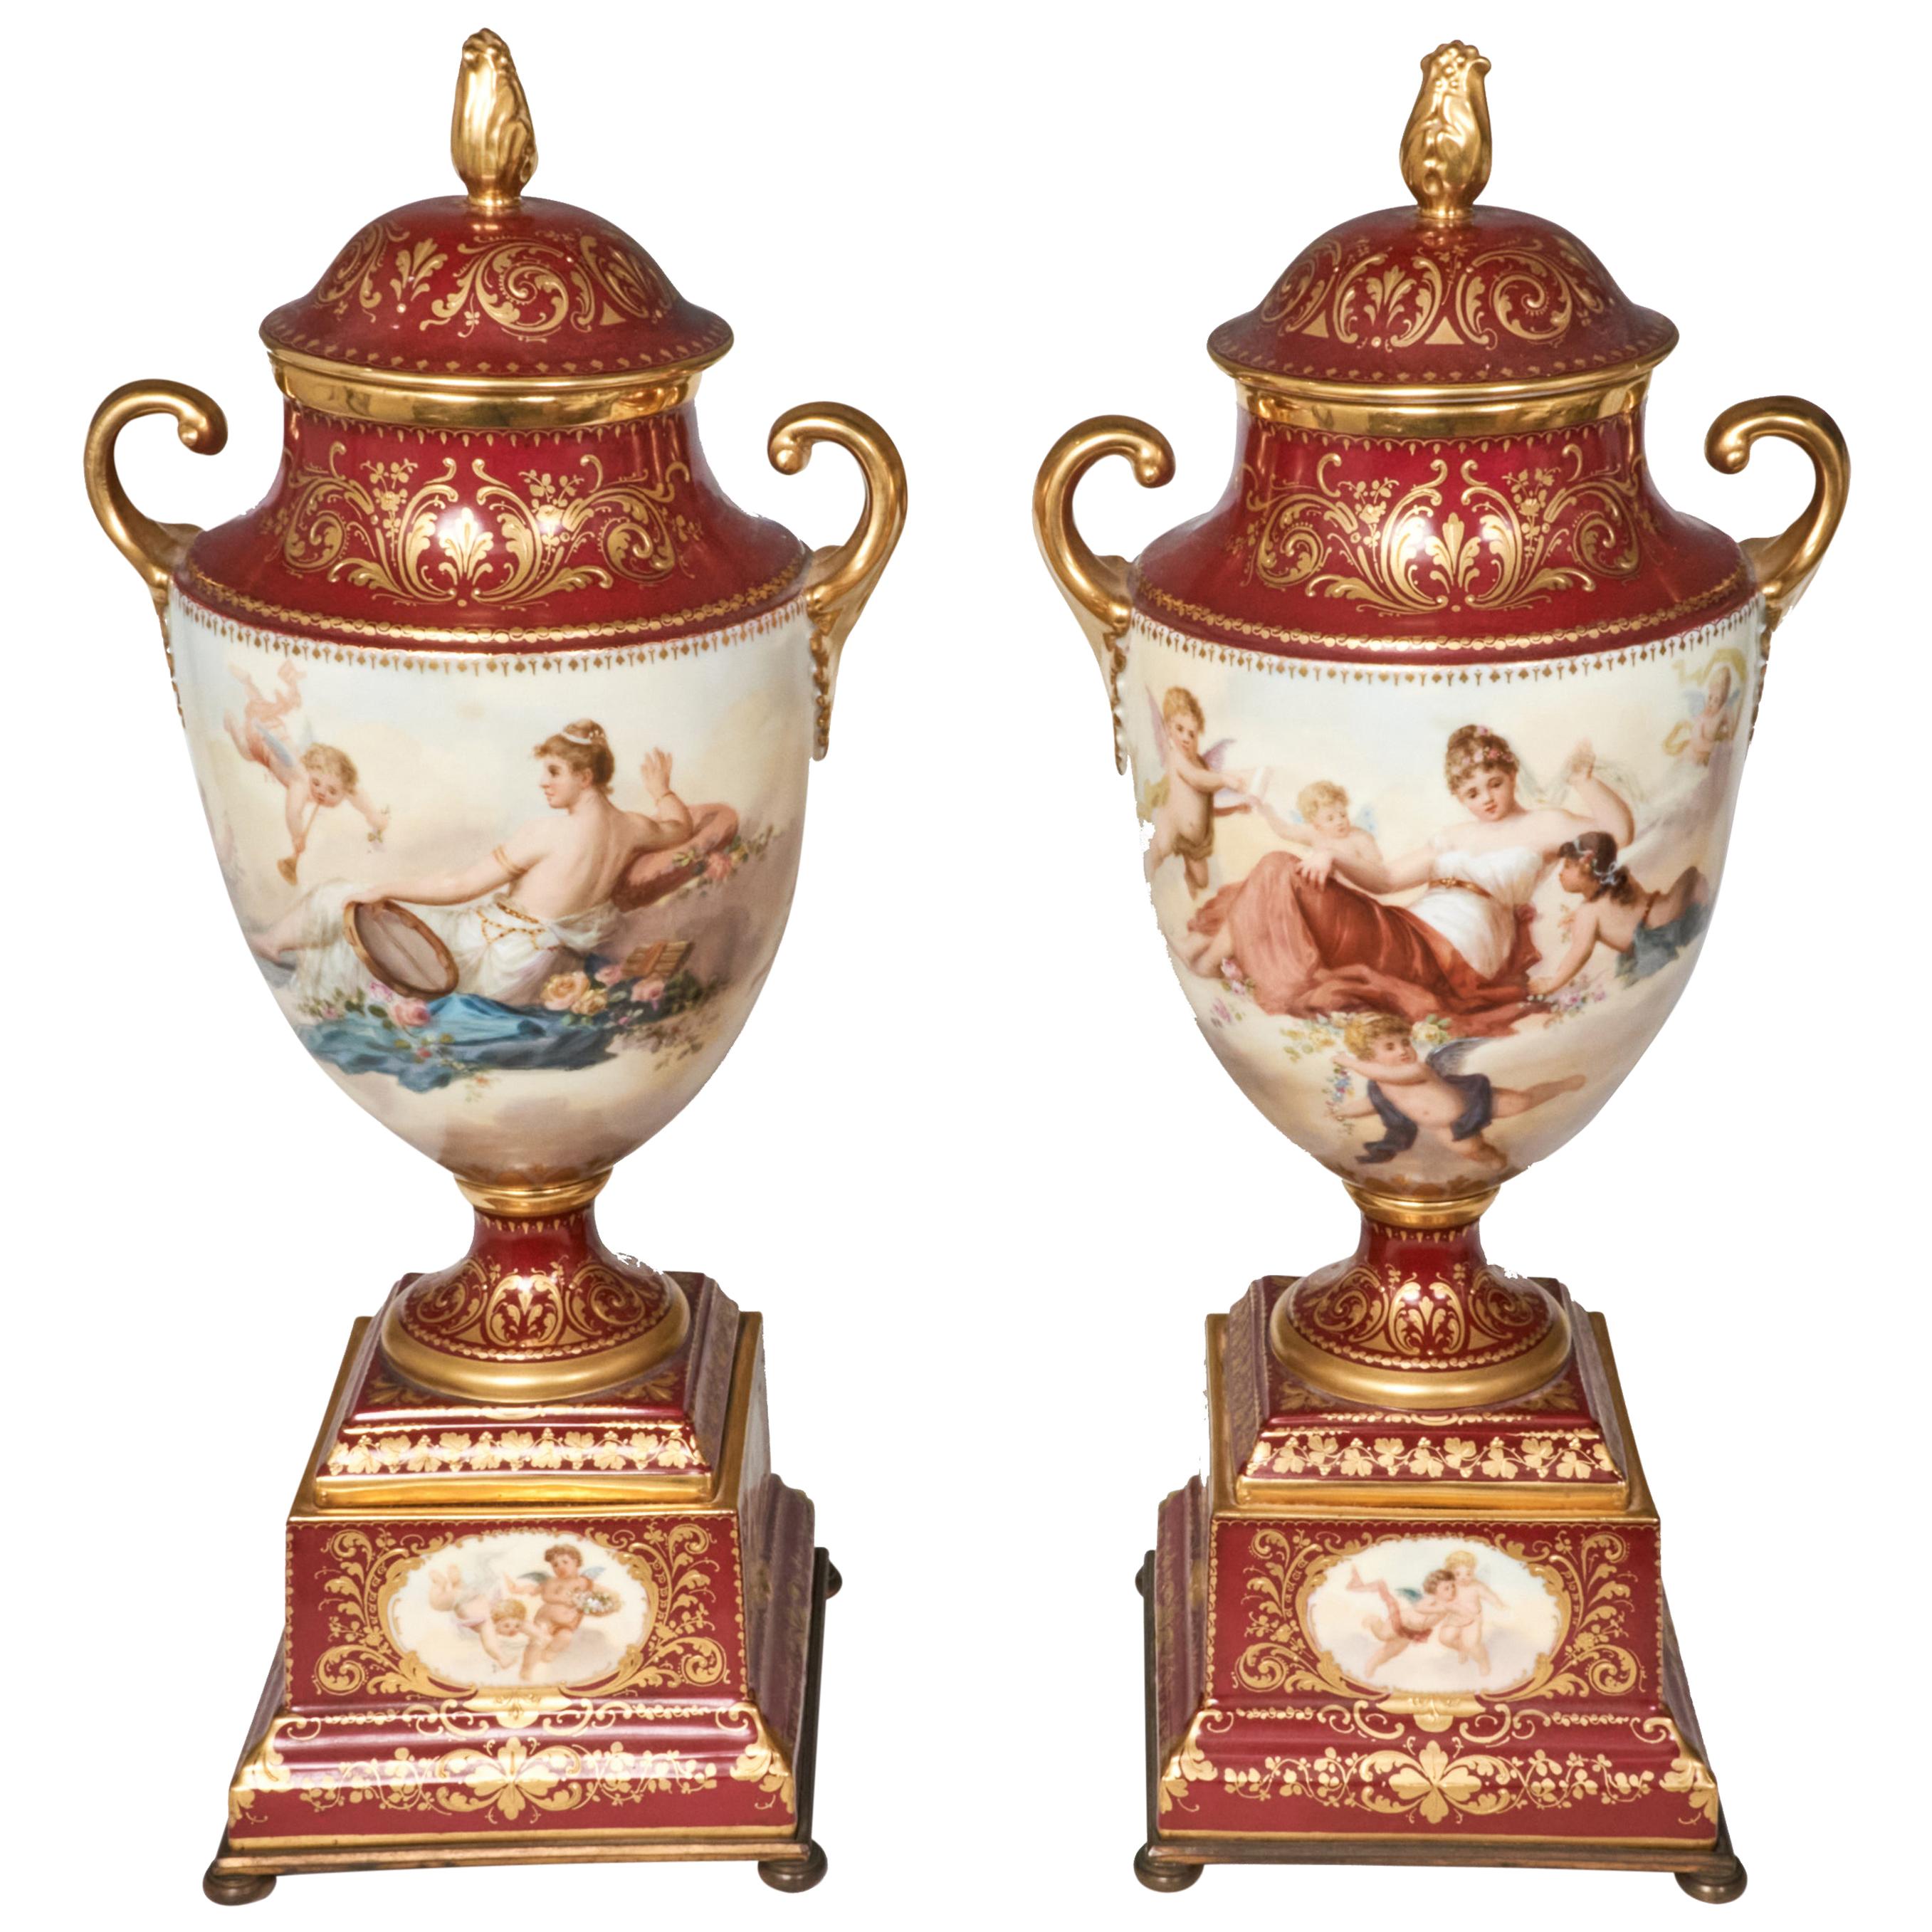 Pair of 19th Century Royal Vienna Urns, Signed